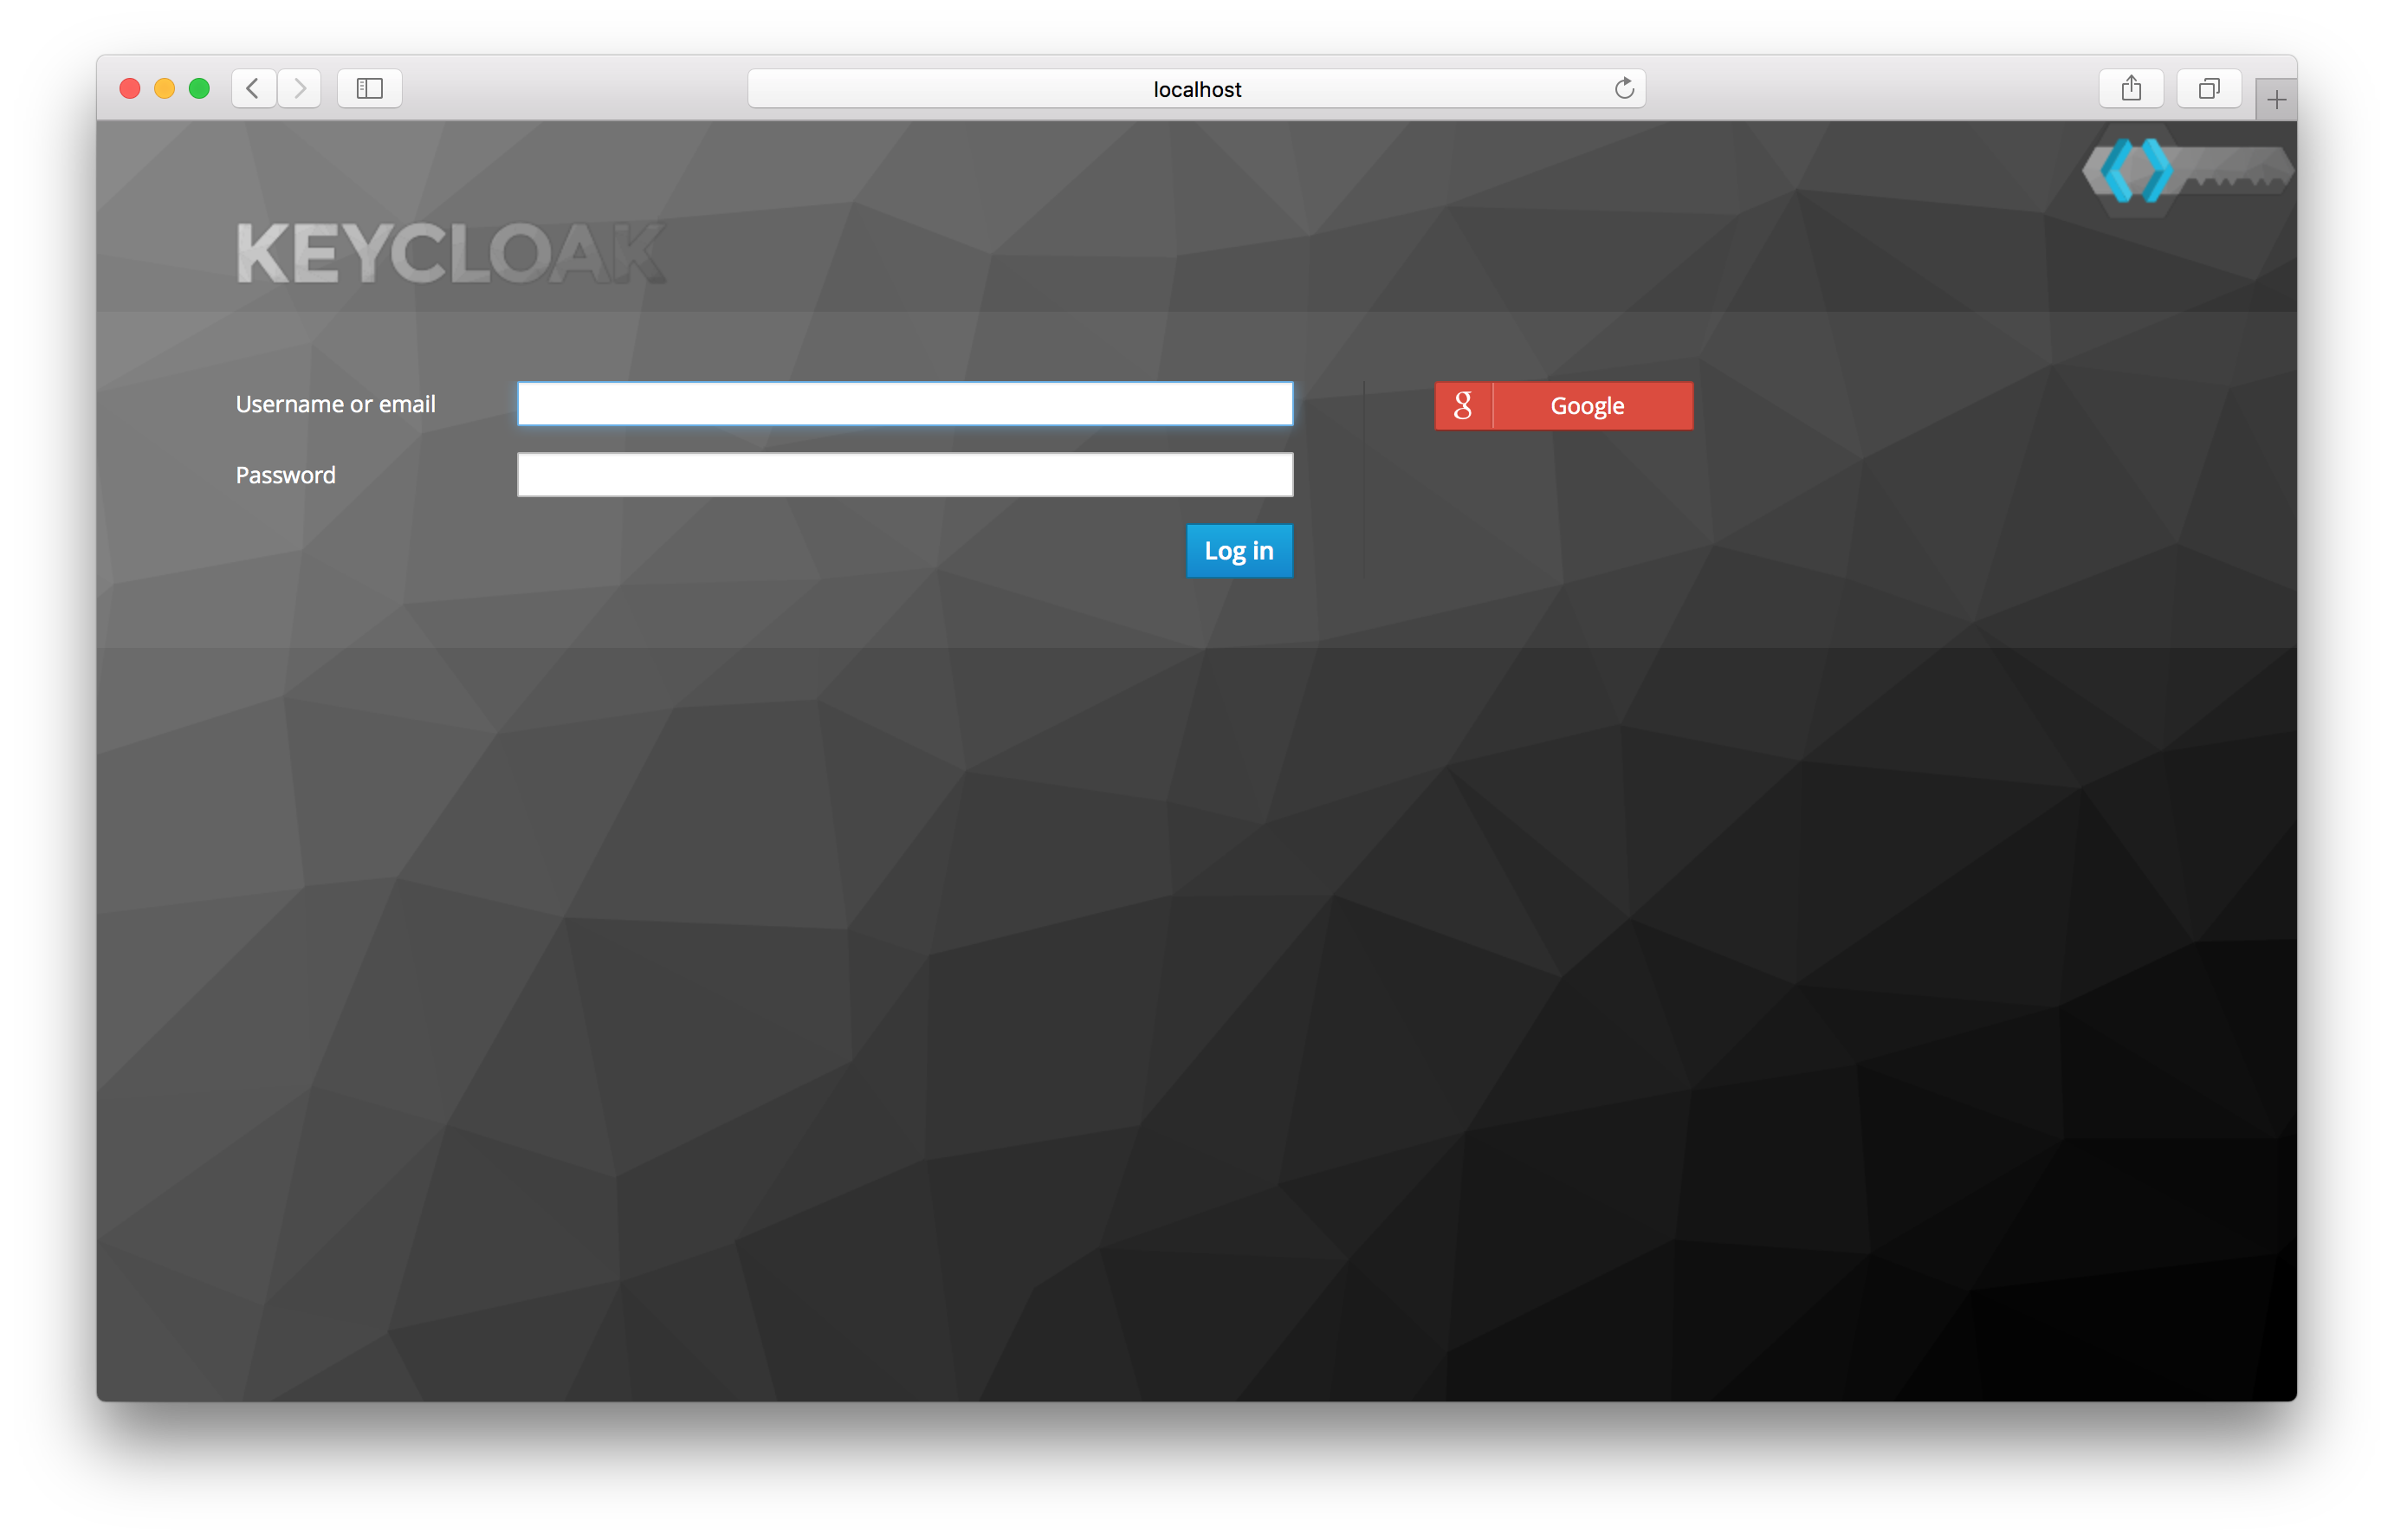 identity-provider-login-page.png